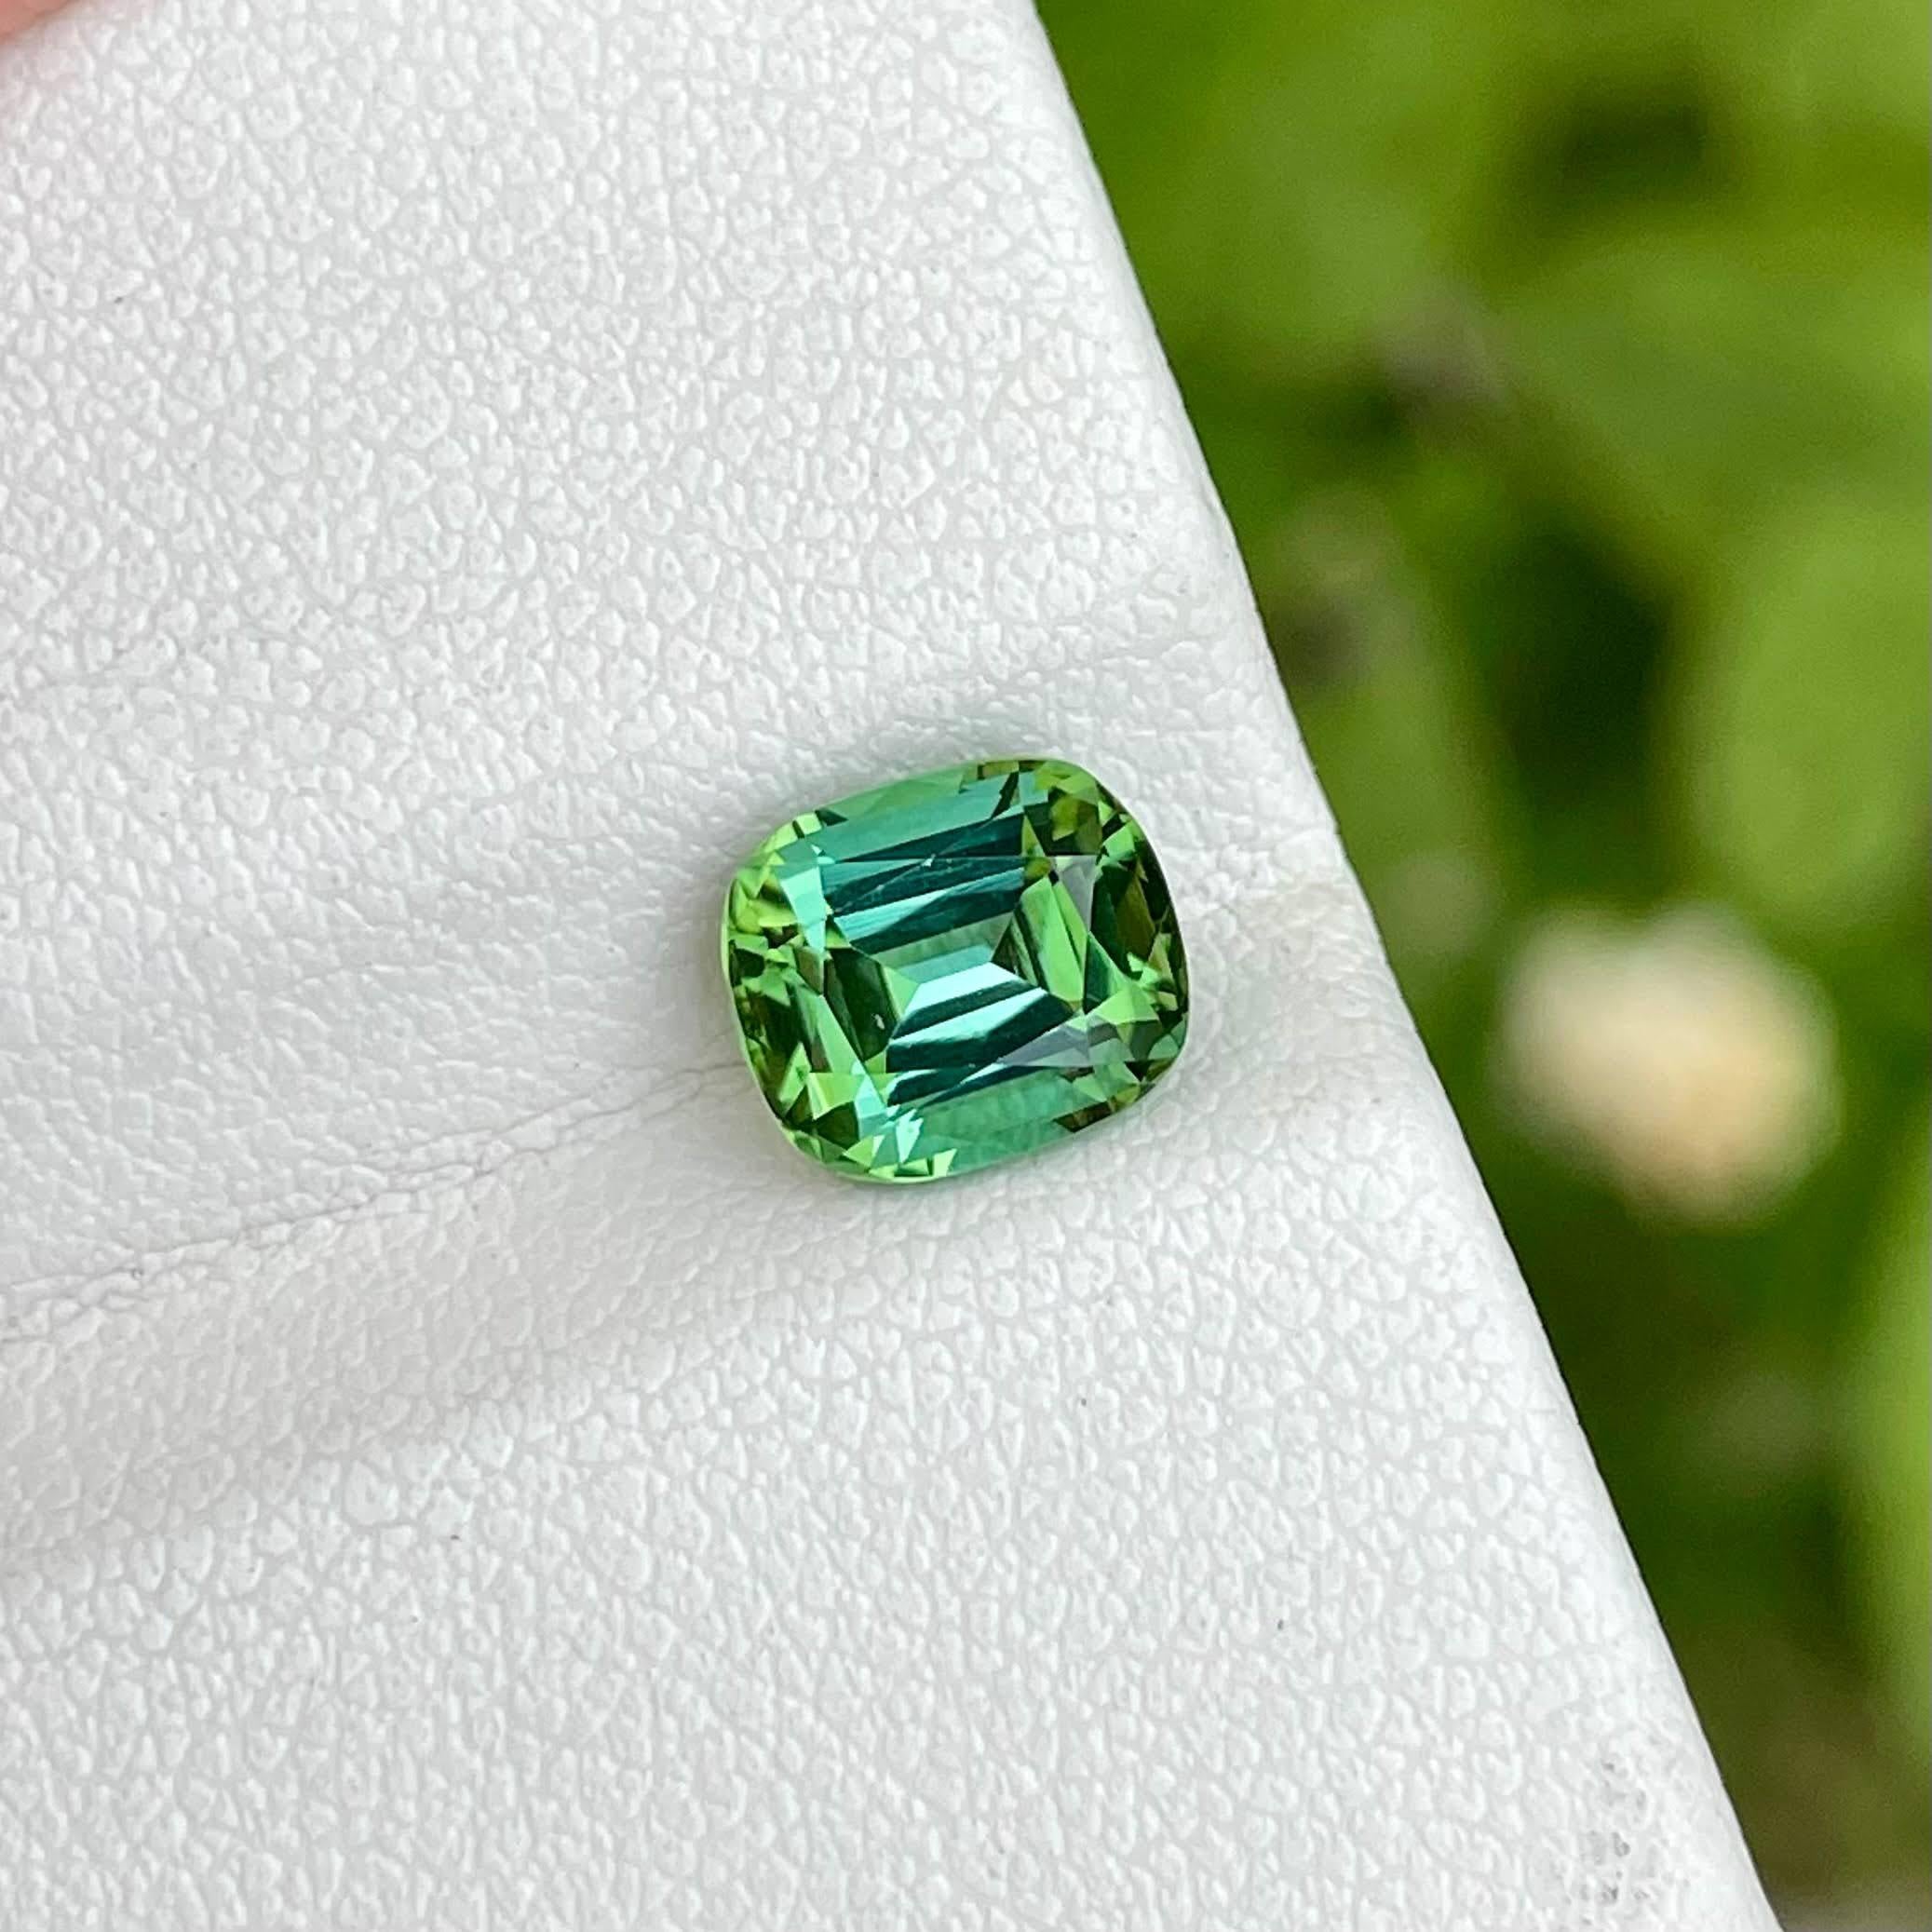 Weight 1.85 carats 
Dimensions 7.7x6.7x5.0 mm
Treatment none 
Origin Afghanistan 
Clarity VVs
Shape cushion 
Cut fancy cushion 



The 1.85 carat Mint Green Tourmaline stone, meticulously cut into a cushion shape, is a striking example of Afghan